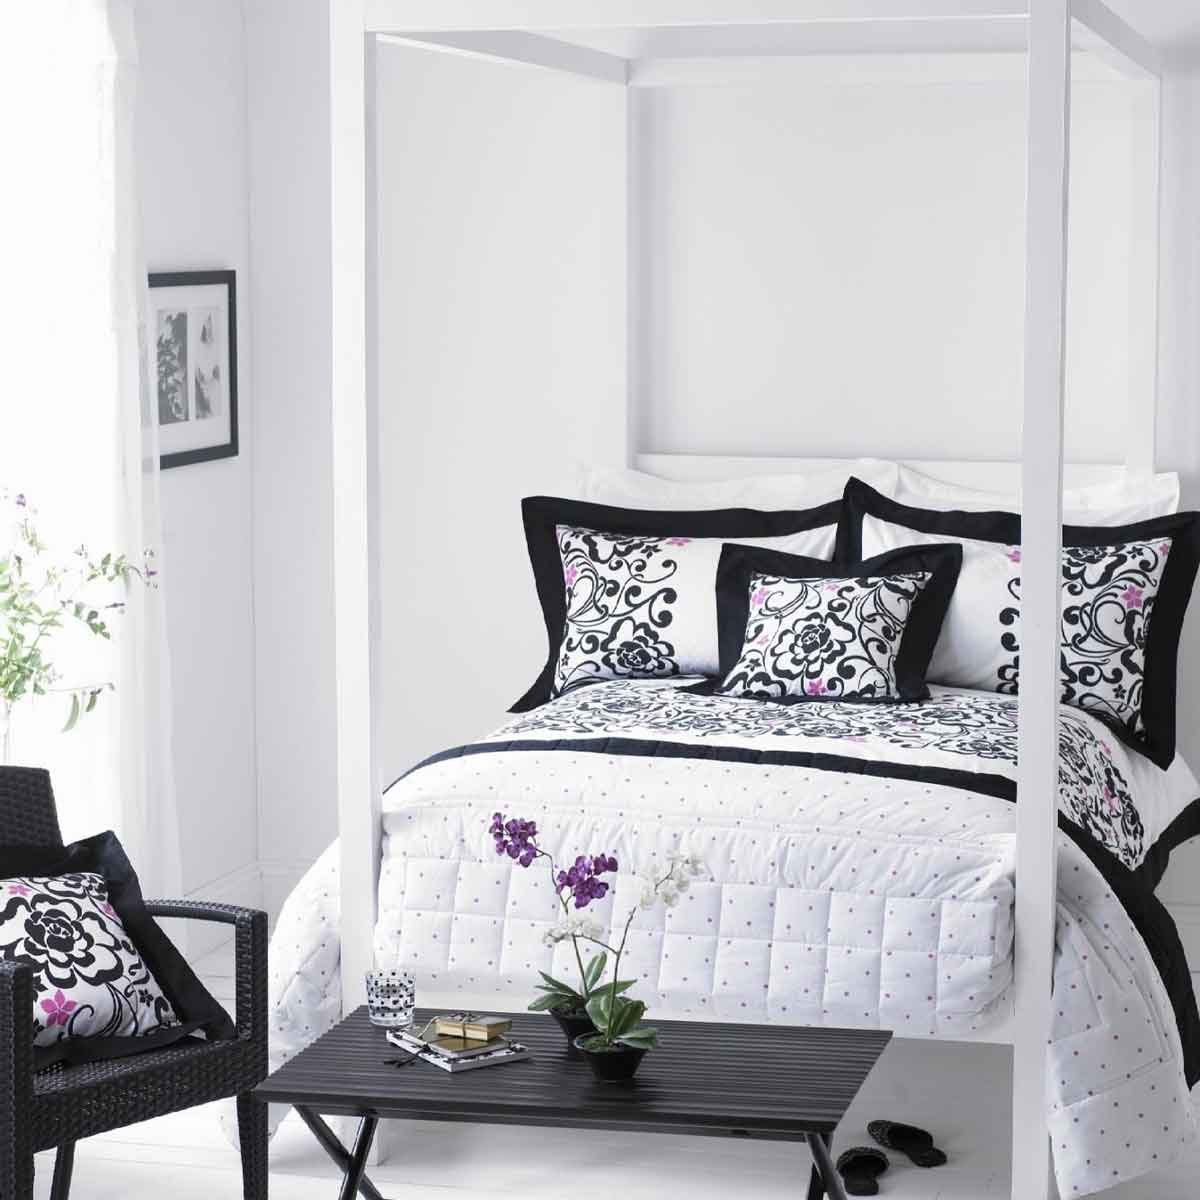 Black White With Cute Black White Bedroom Decor With Four Poster Bed Design And Decorative Bed Cover Ideas Beside Bedroom Chairs Bedroom 23 Marvelous Black And White Bedroom Design Full Of Personality